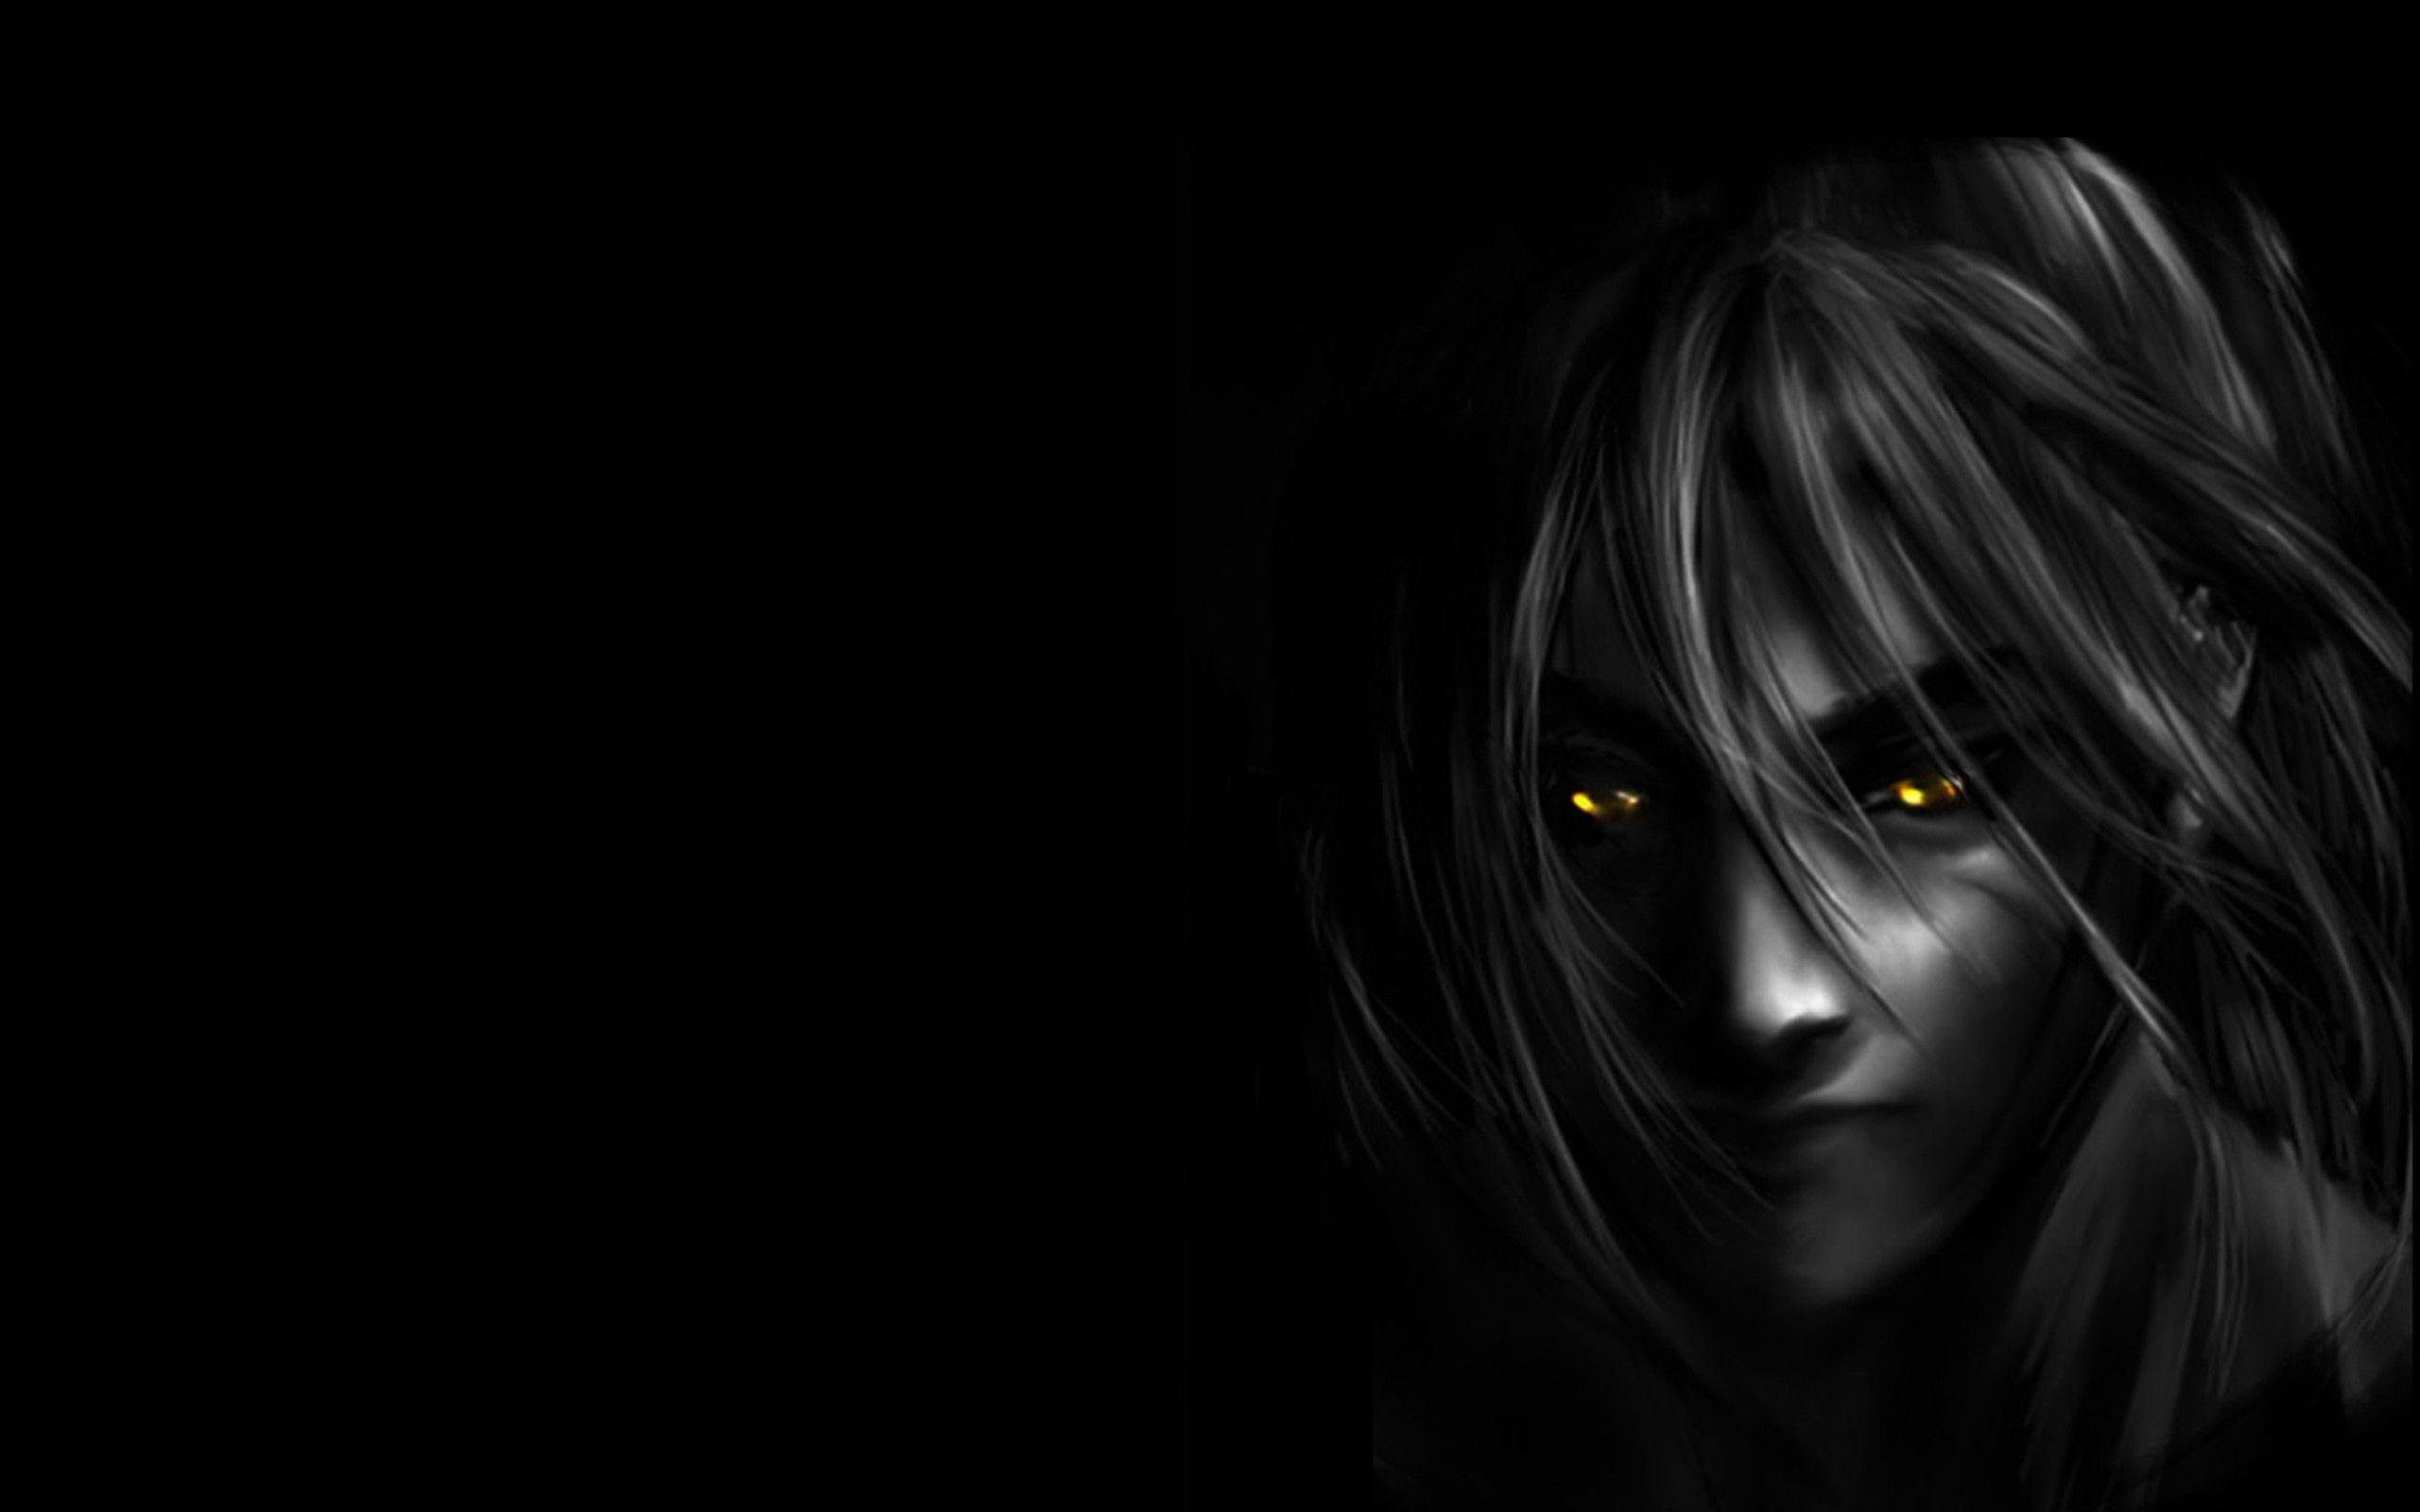 Creepy Female Anime Wallpapers - Wallpaper Cave